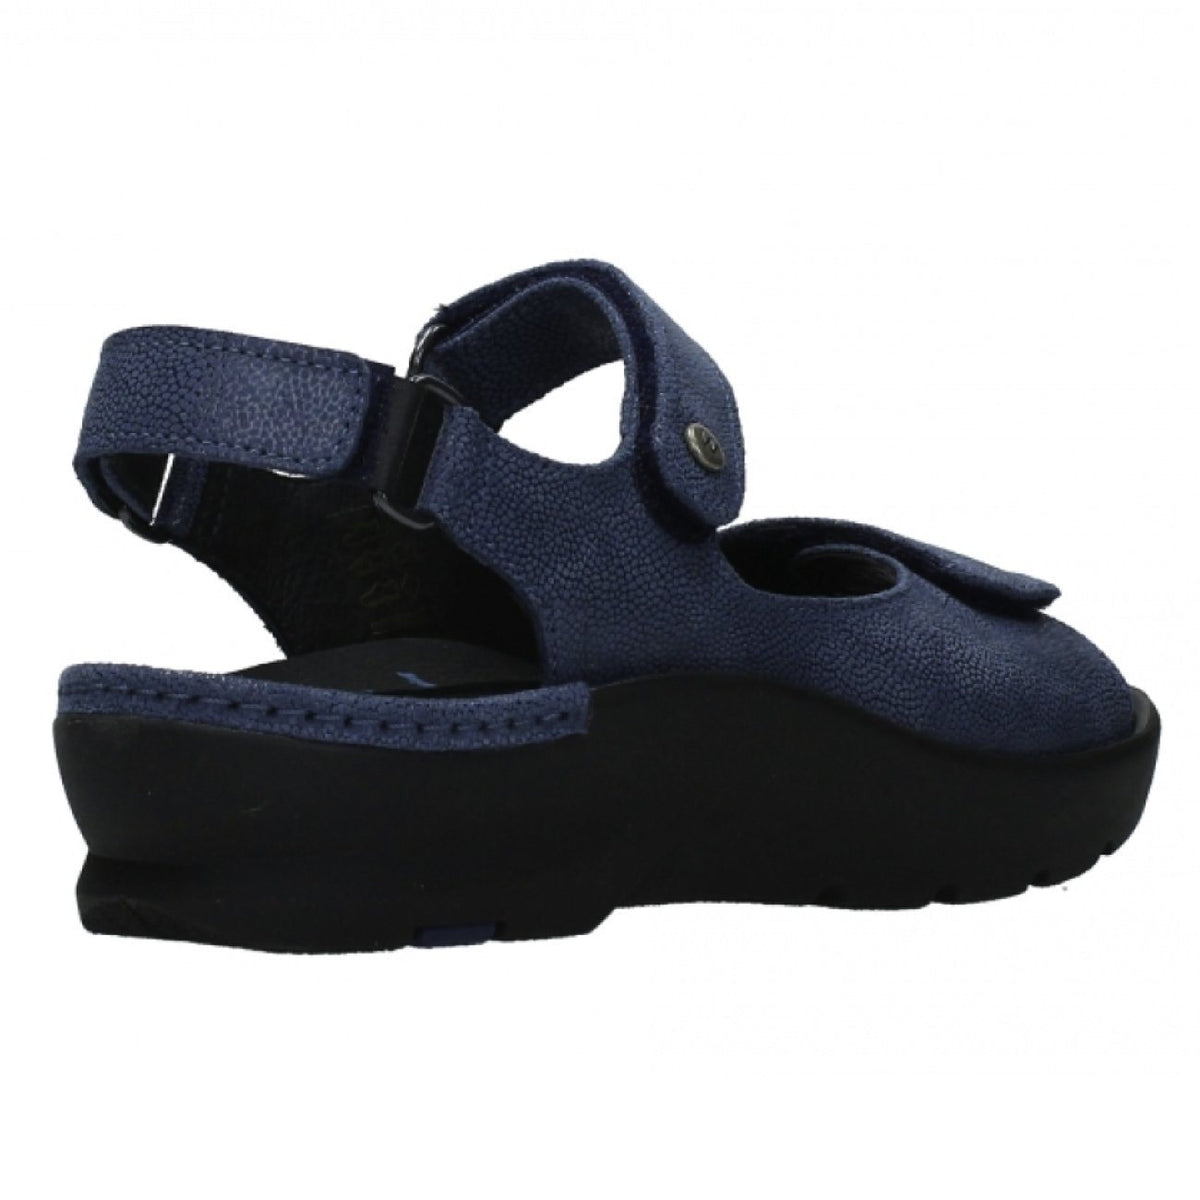 Wolky, Delft, Sandals, Leather, Denim Sandals Wolky 